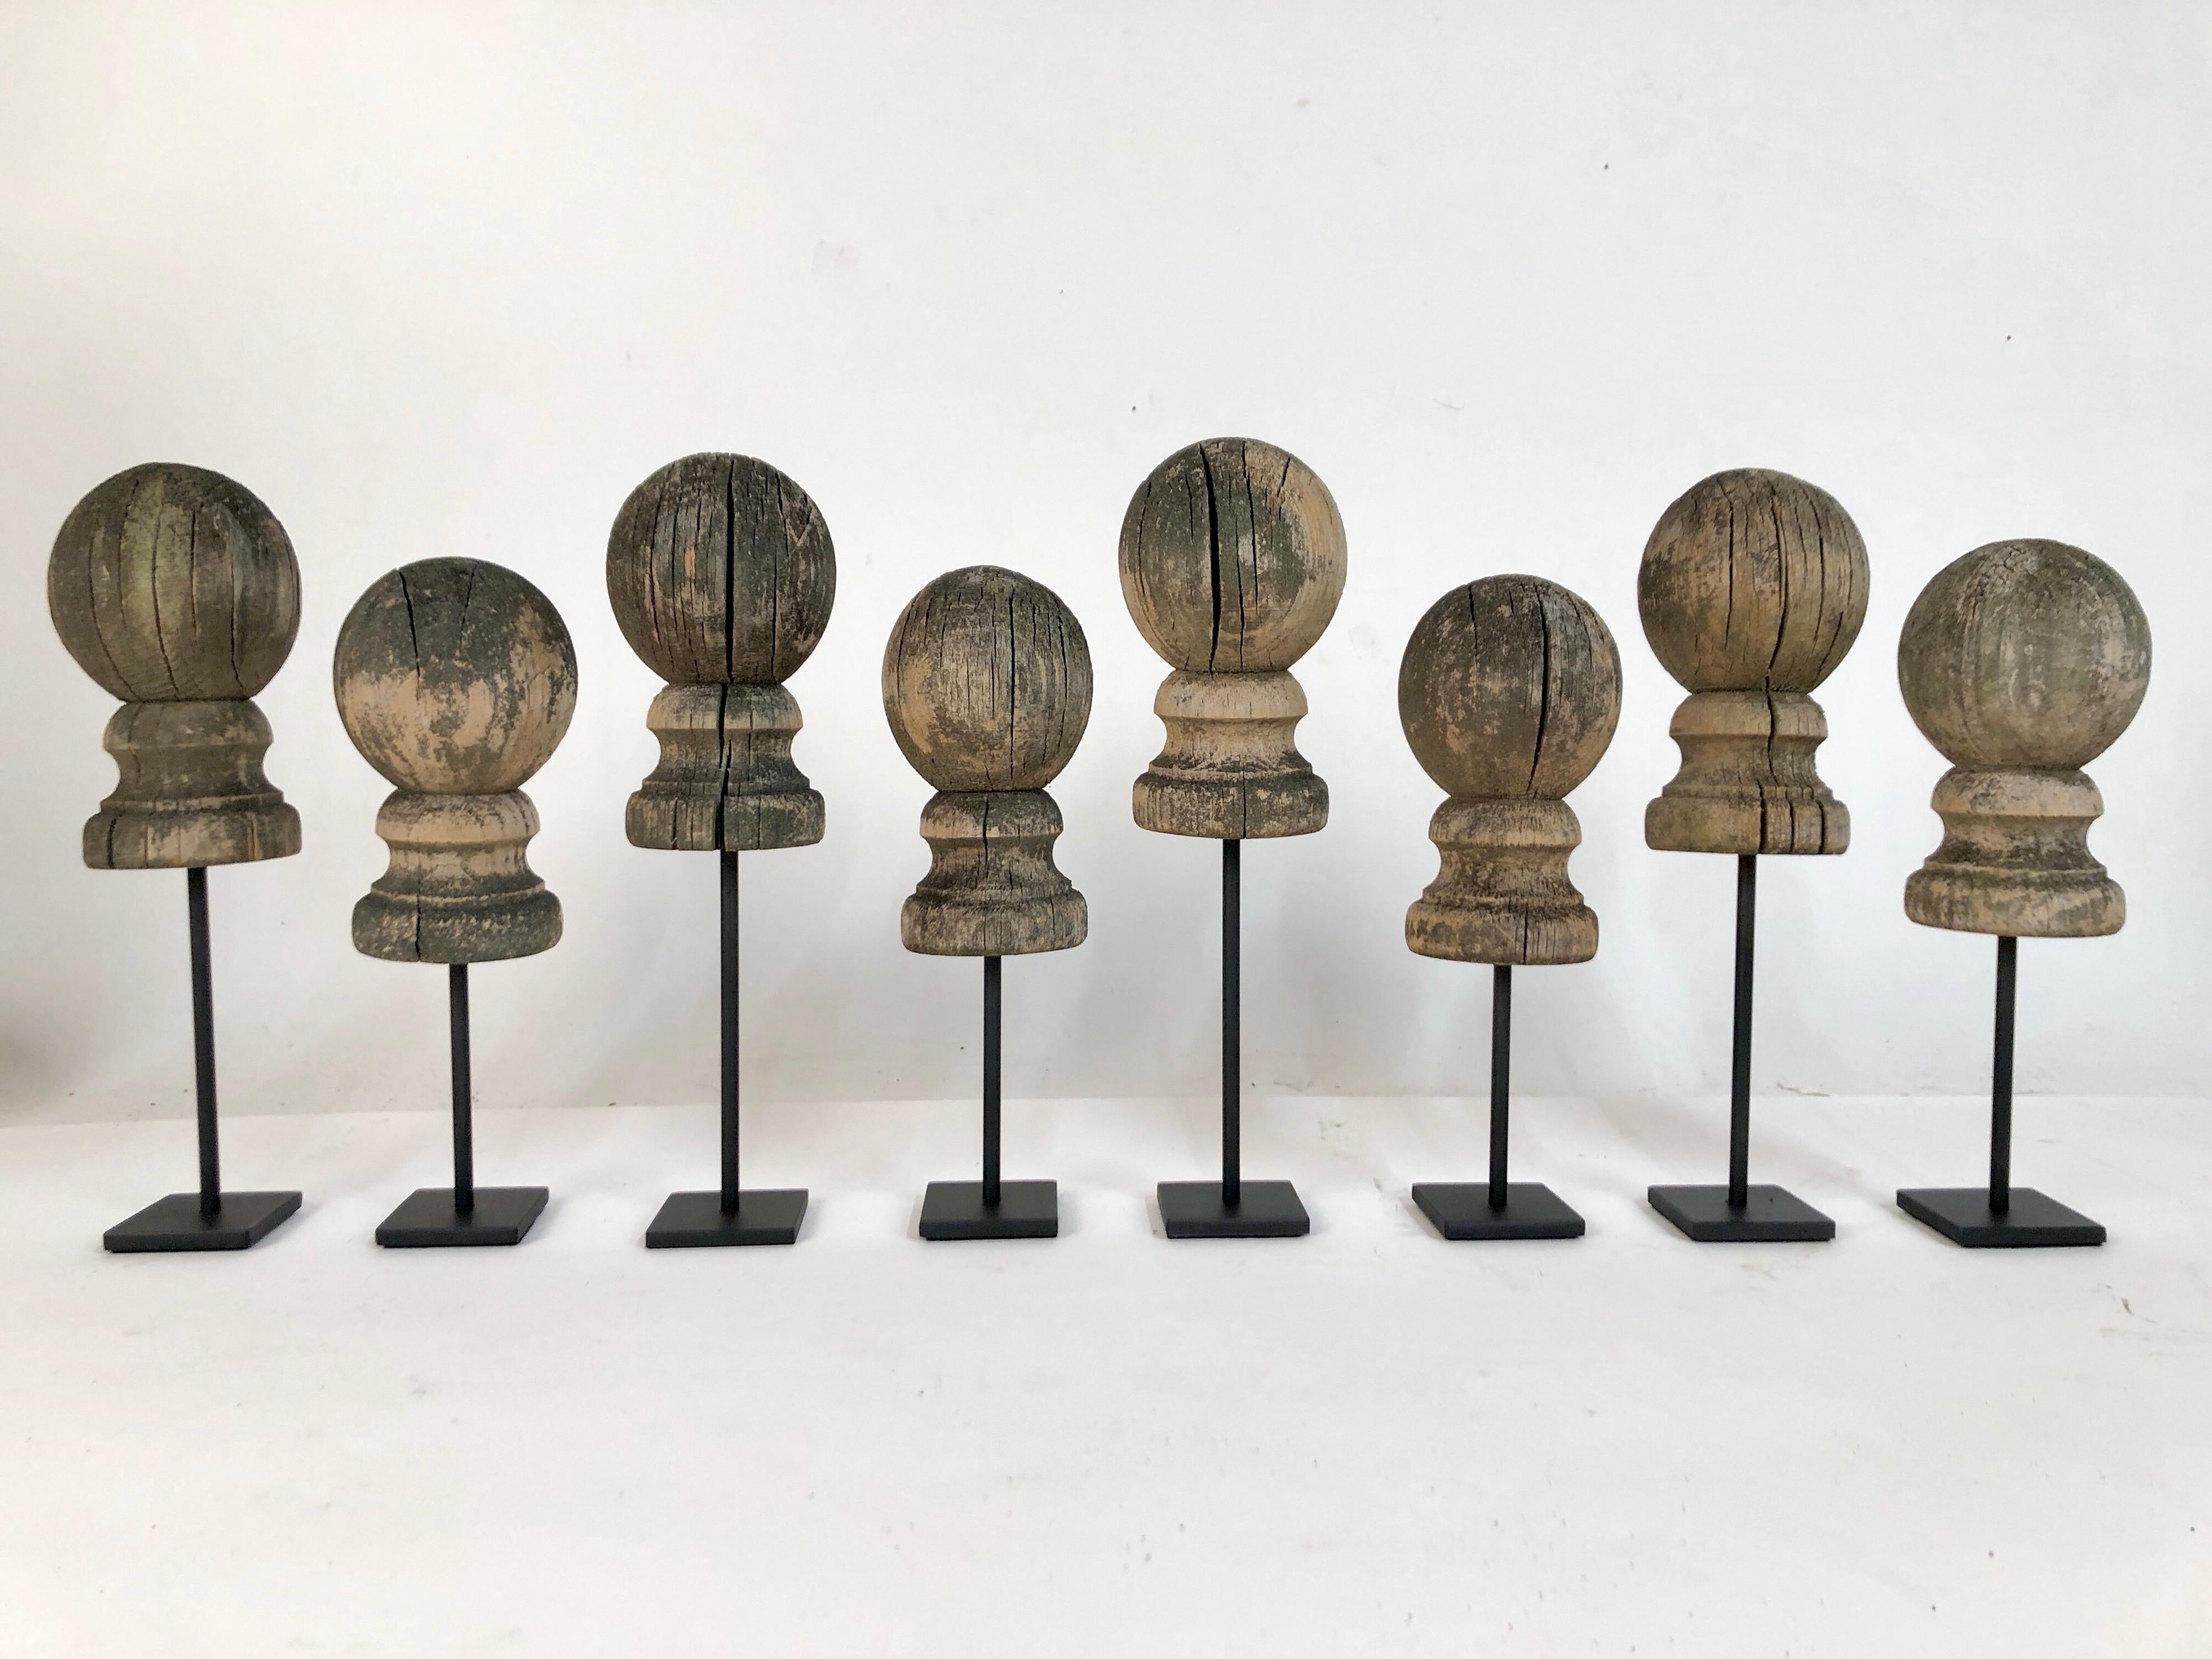 A collection of 8 antique 19th century wooden fence post finials on custom made steel stands. Original beautifully weathered surface. Very sculptural. Finials are 3